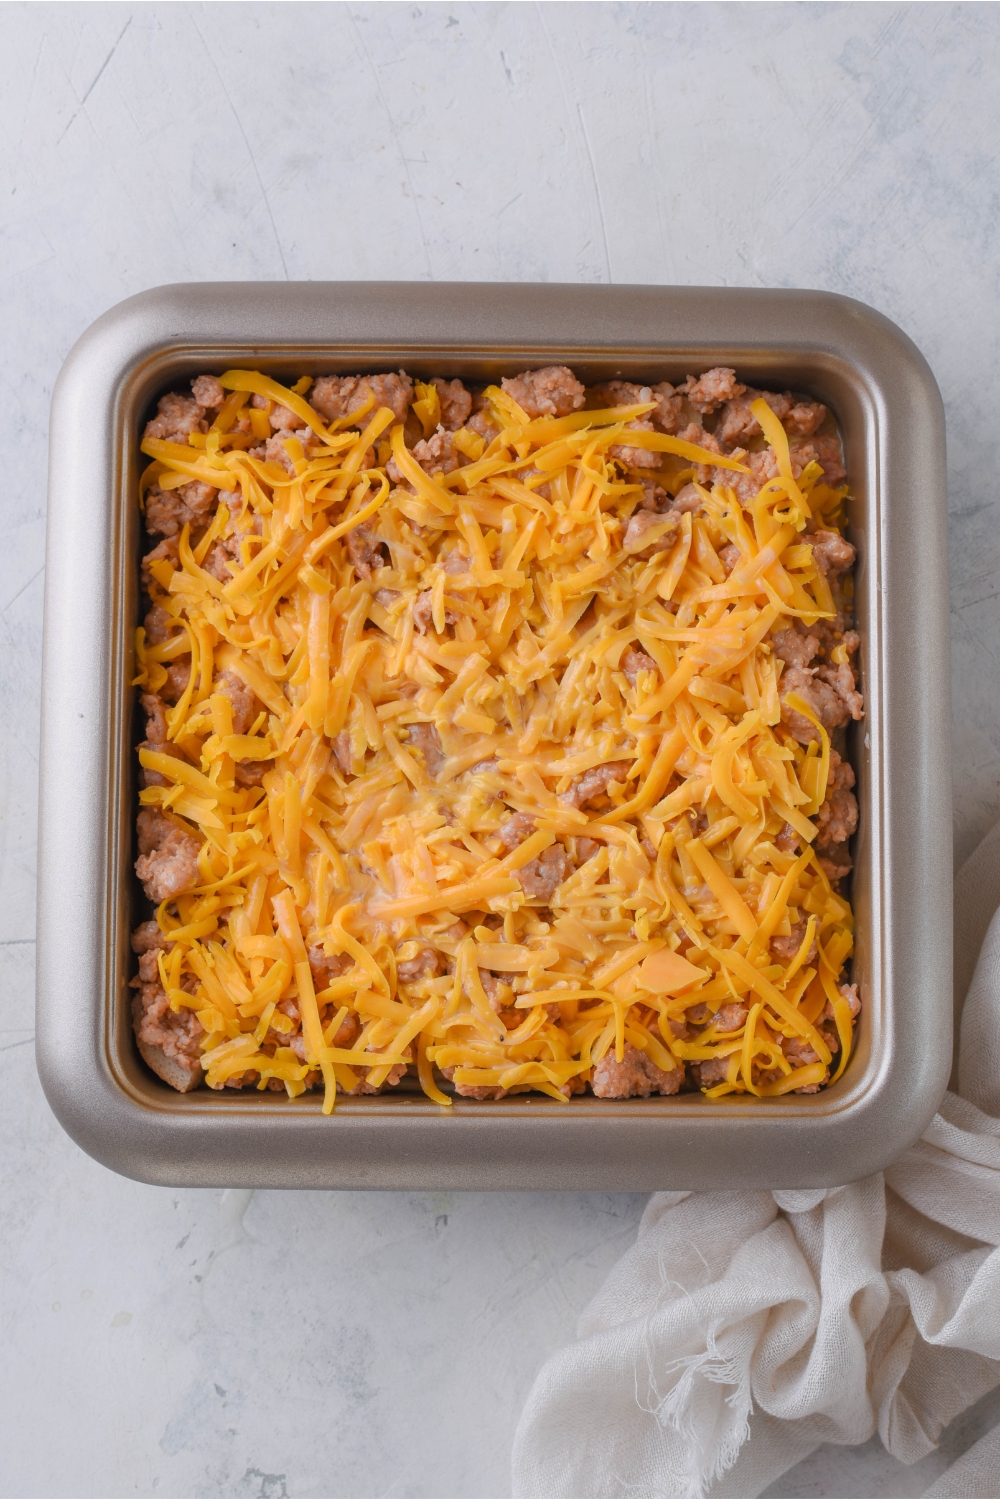 A square baking dish filled with cooked sausage, bread cubes, an egg mixture, and a layer of shredded cheese covering the dish.